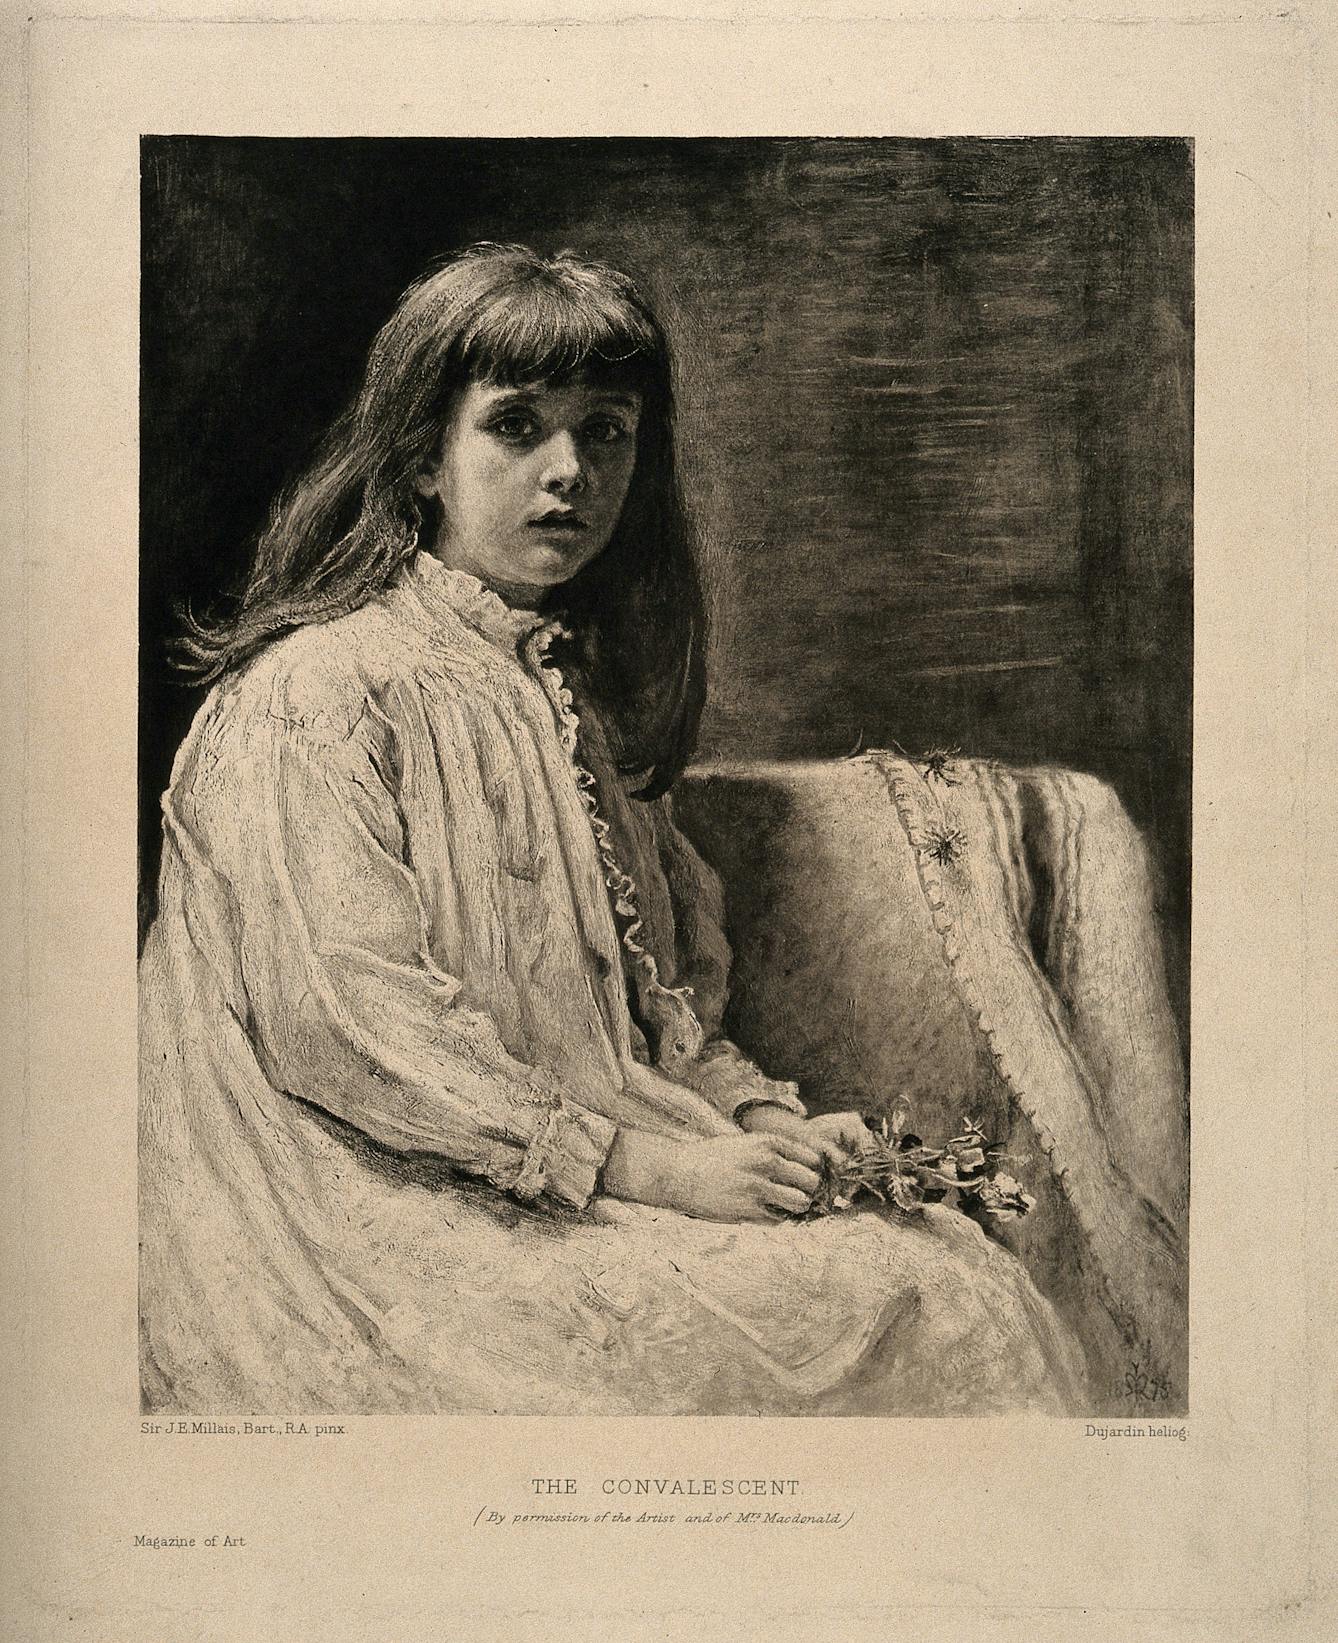 Black and white painting of a young girl in an nightdress.